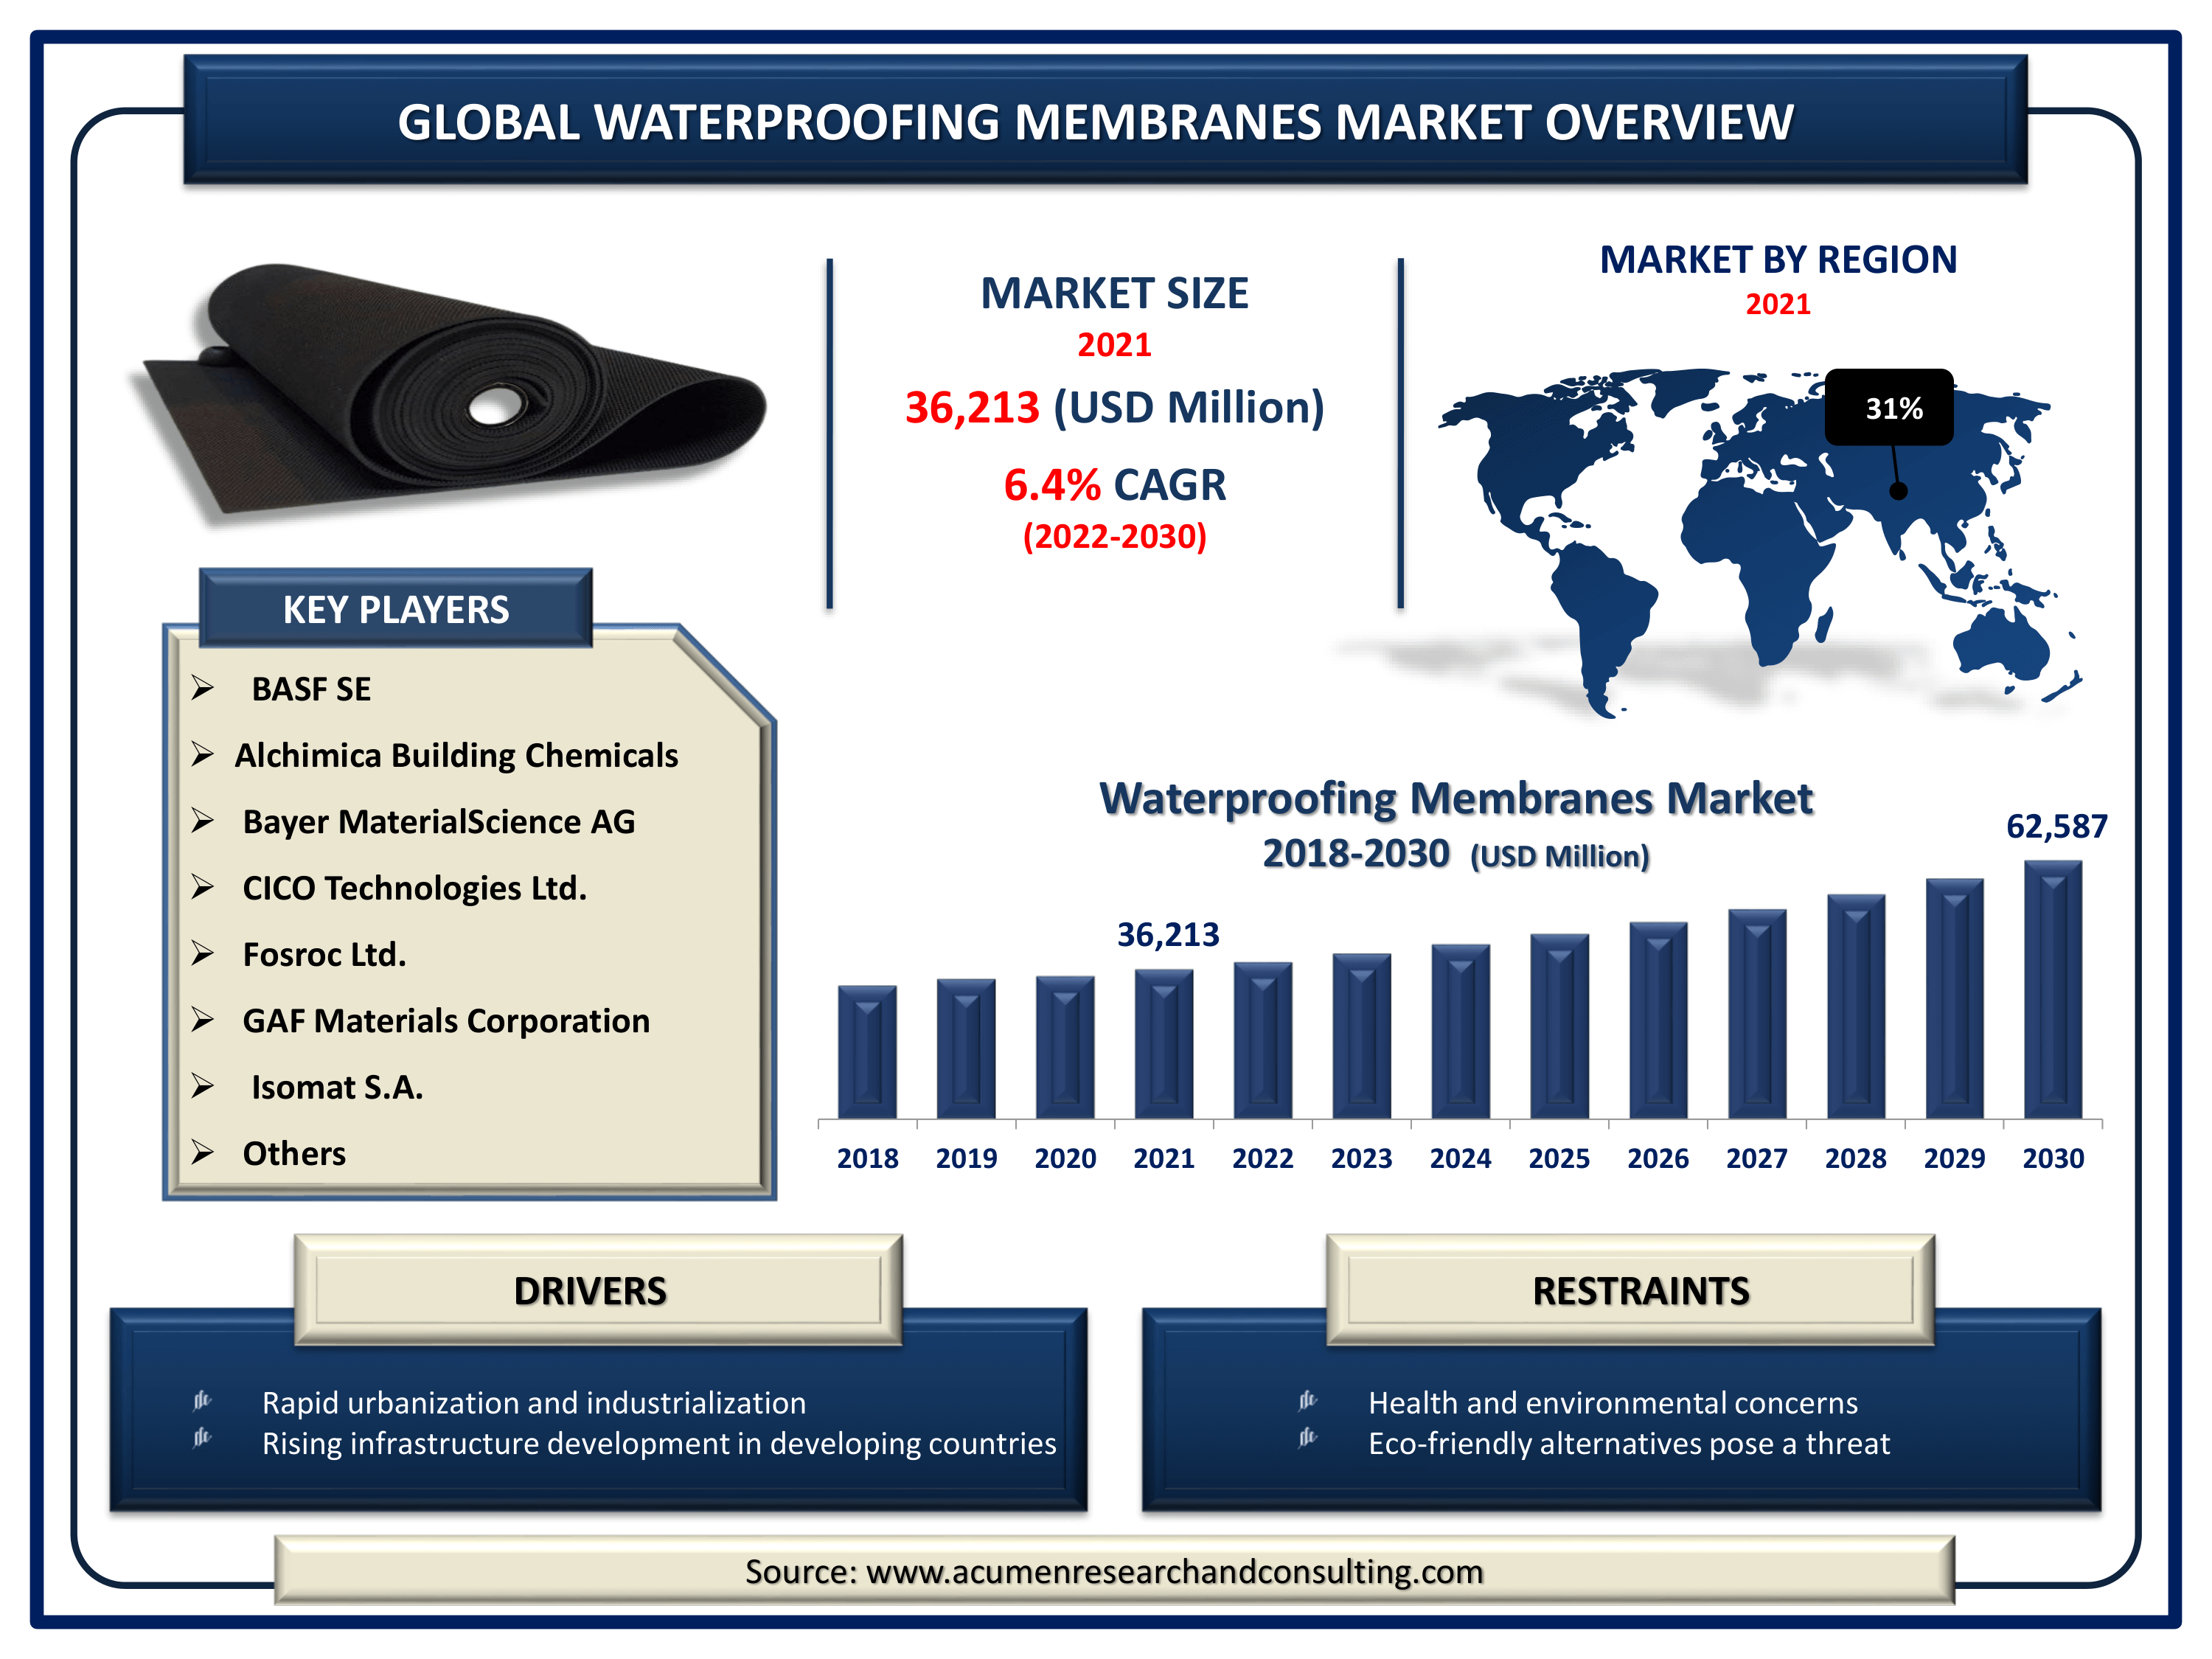 Global waterproofing membranes market revenue is expected to increase by USD 62,587 million by 2030, with a 6.4% CAGR from 2022 to 2030.